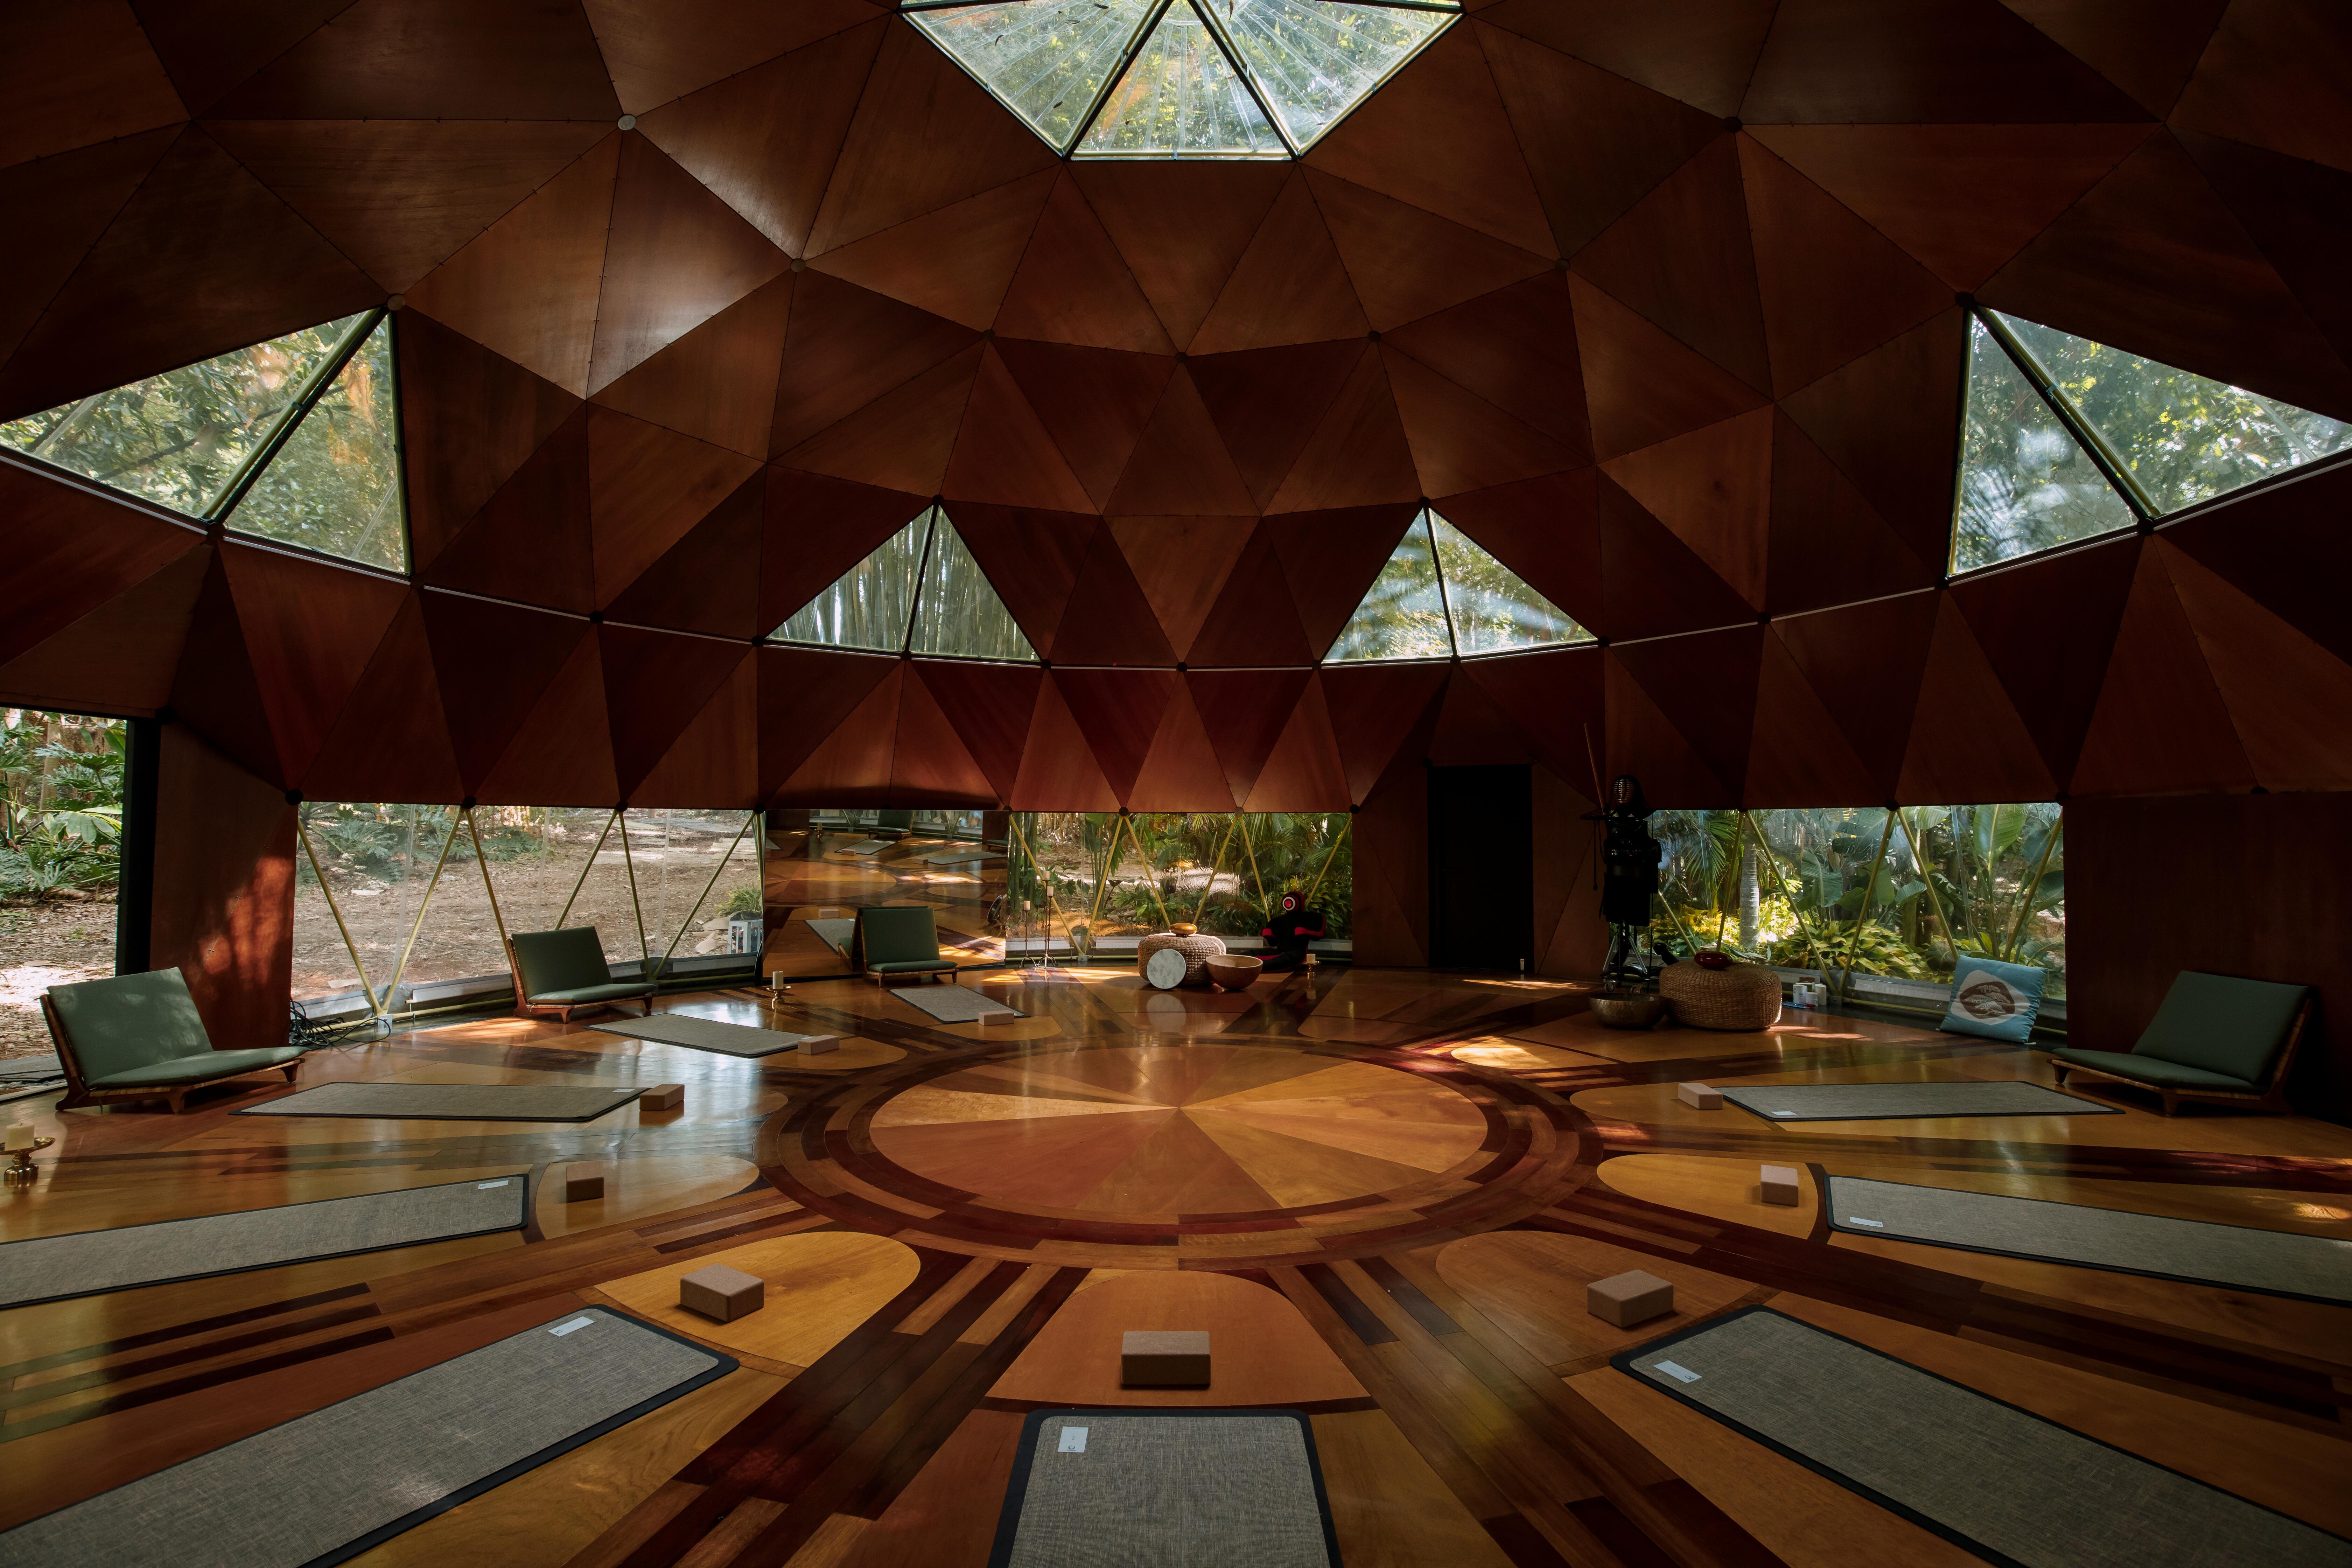 A large yoga/meditation room with big glass windows at Tranquillum House. Nine mats are placed on the floor awaiting guests.